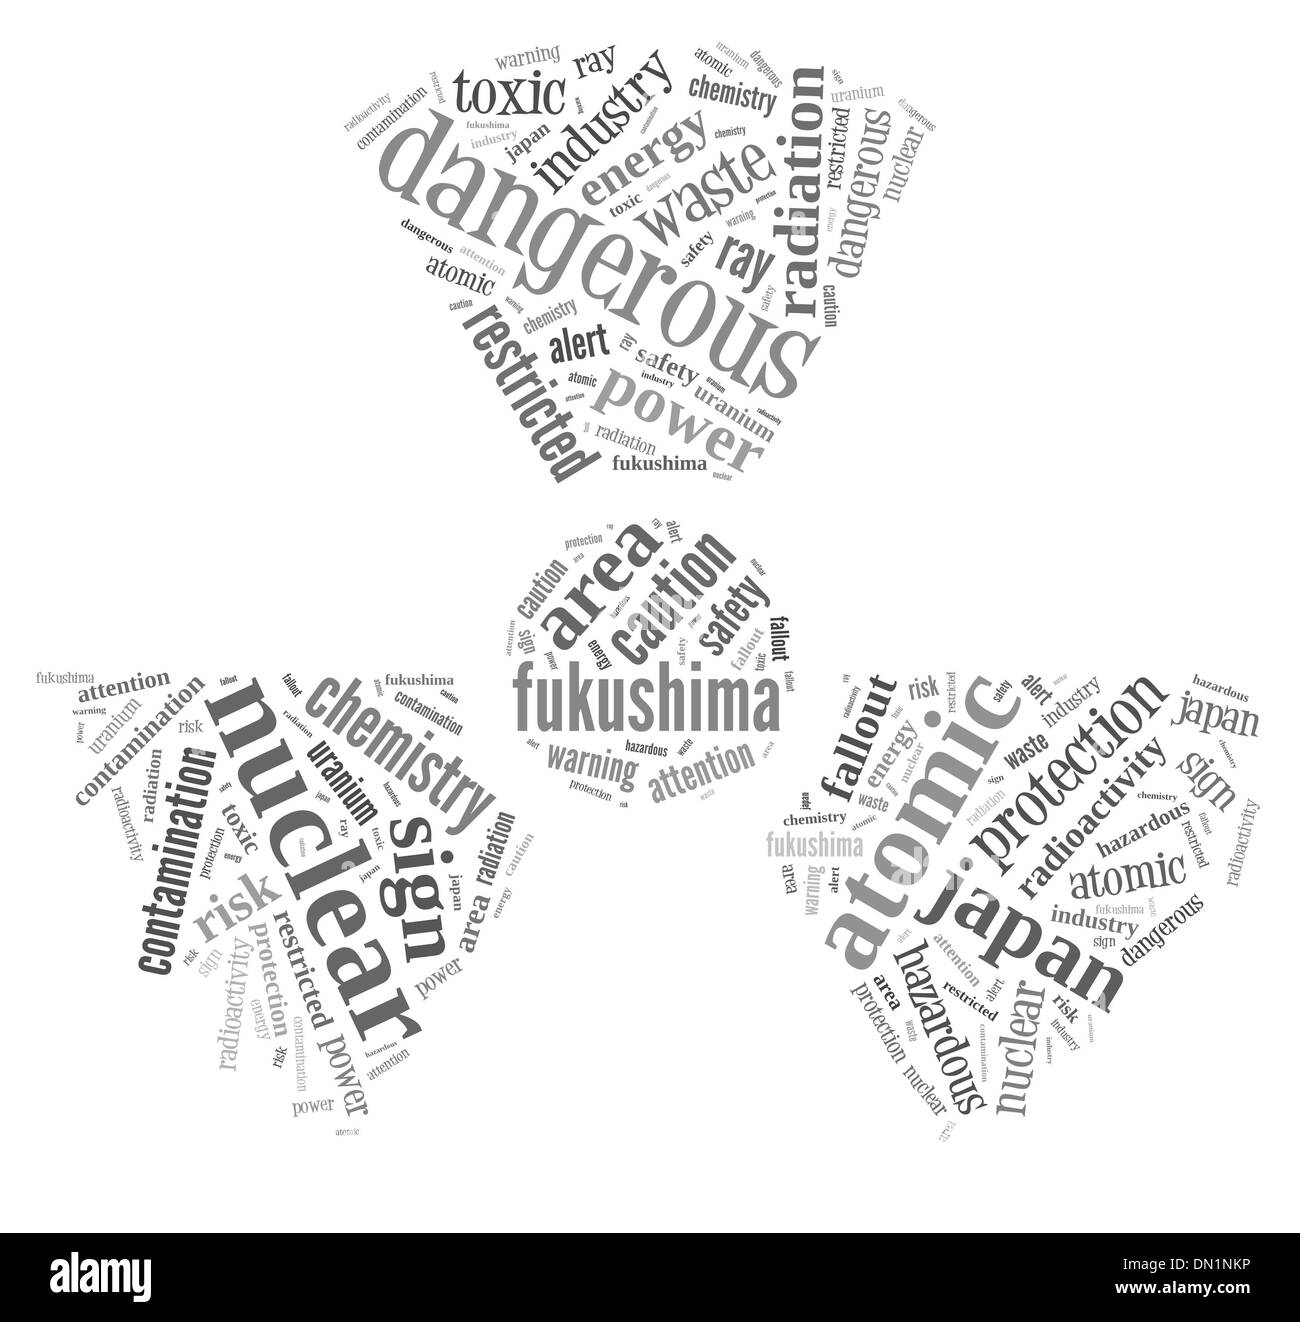 nuclear contamination warning sign word cloud on fukushima with grey wordings on white background Stock Photo